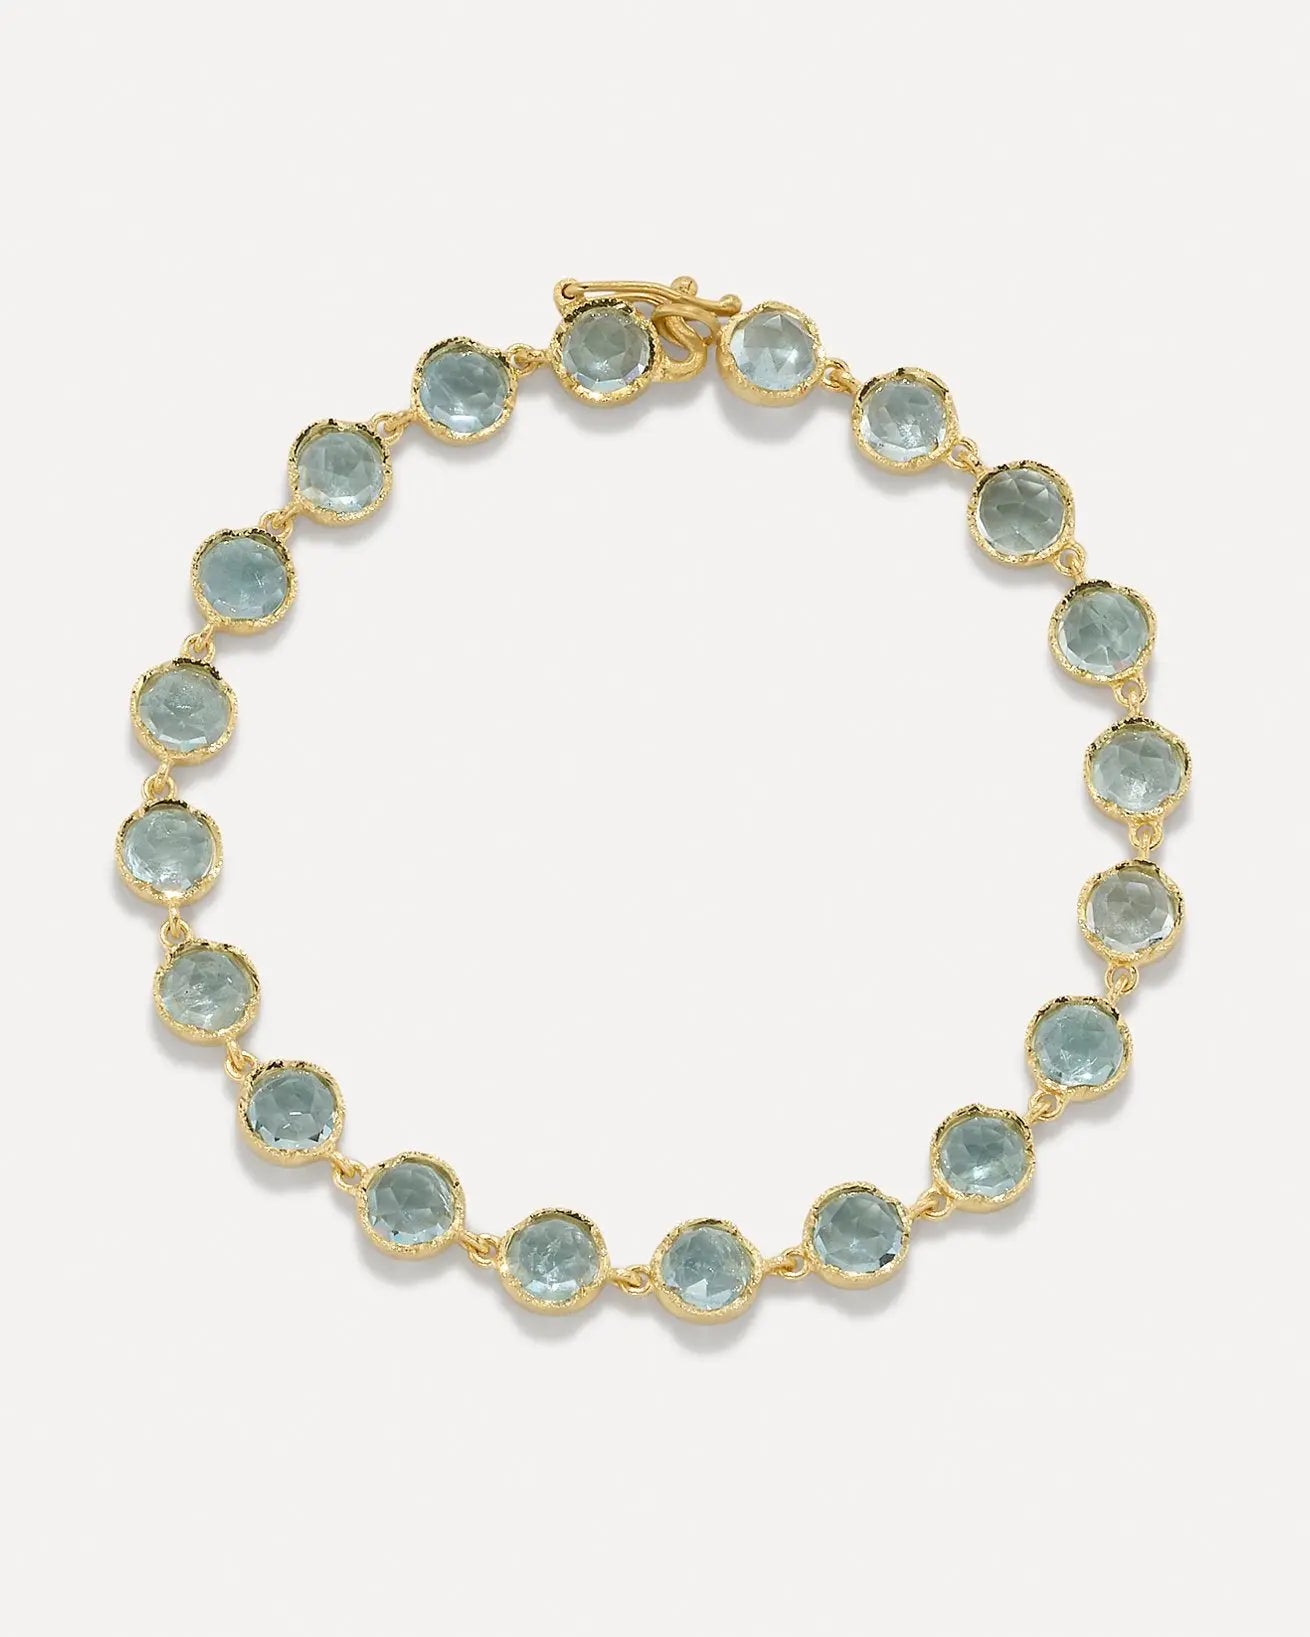 18k yellow gold with faceted aquamarines.   Fine aquamarine 7 inches in length Designed and handmade in Los Angeles